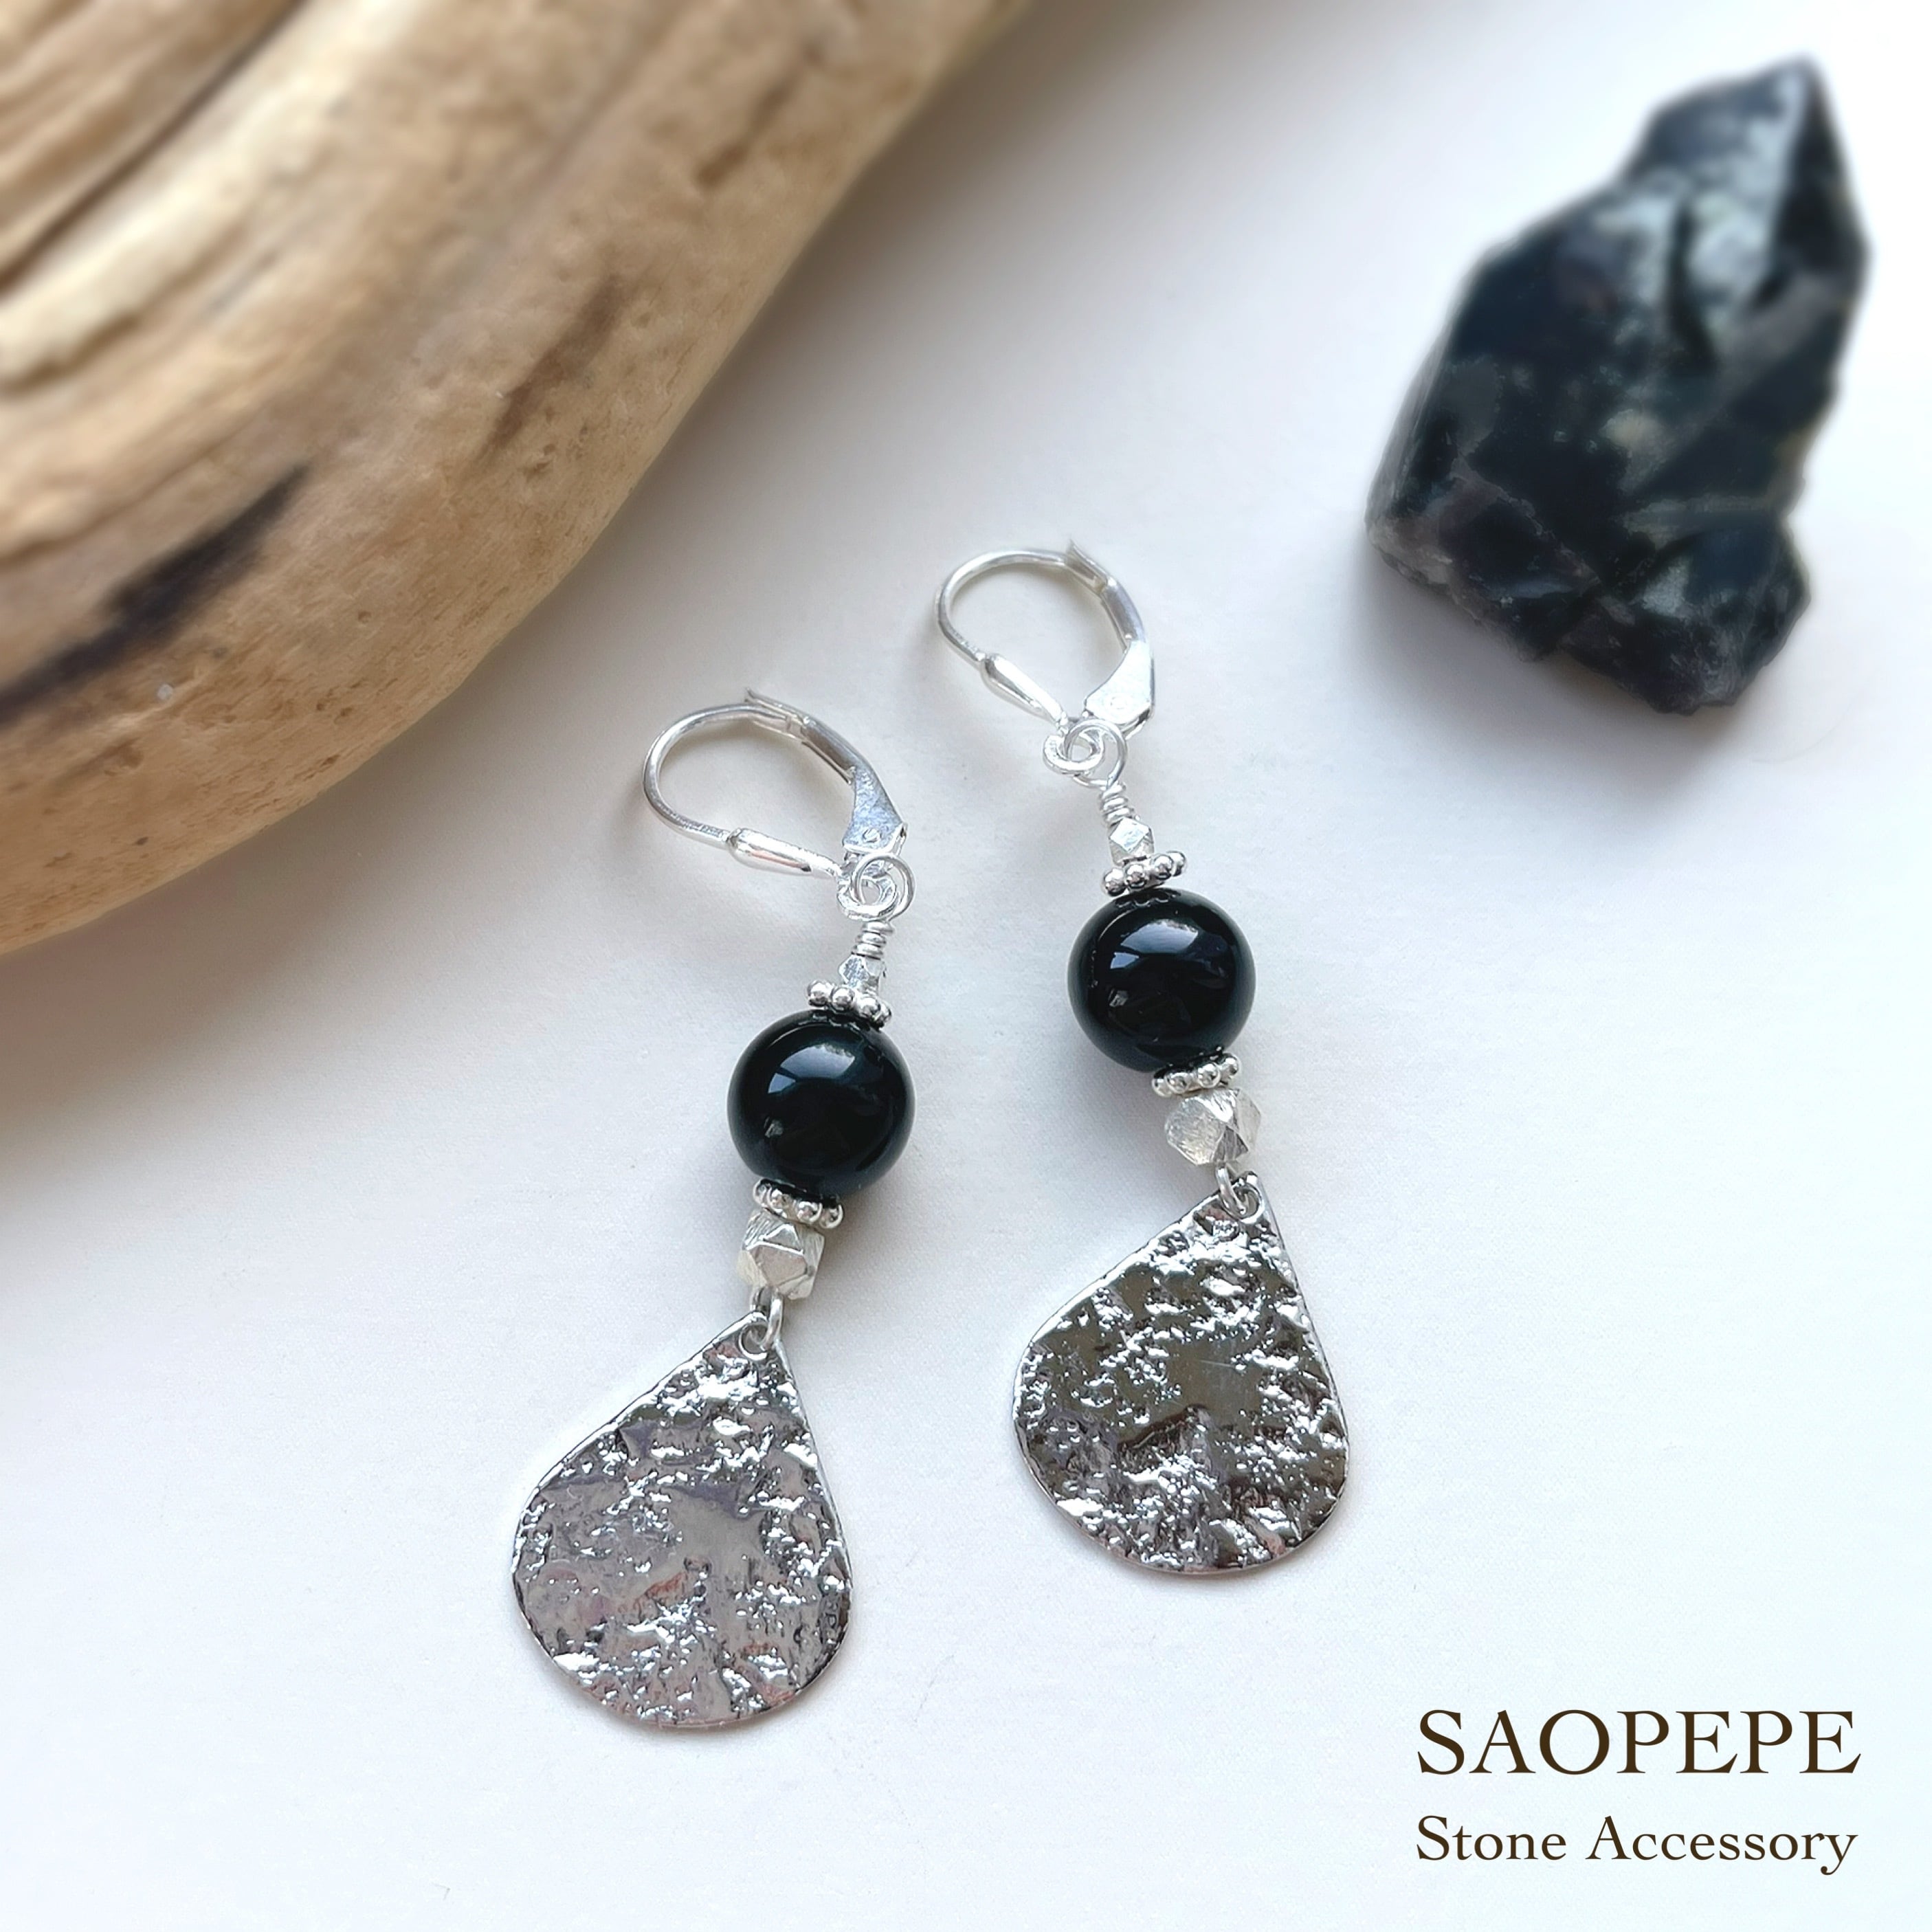 MORION(黒水晶)のDecoピアス【Drop / Silver】 | SAOPEPE Online Shop powered by BASE